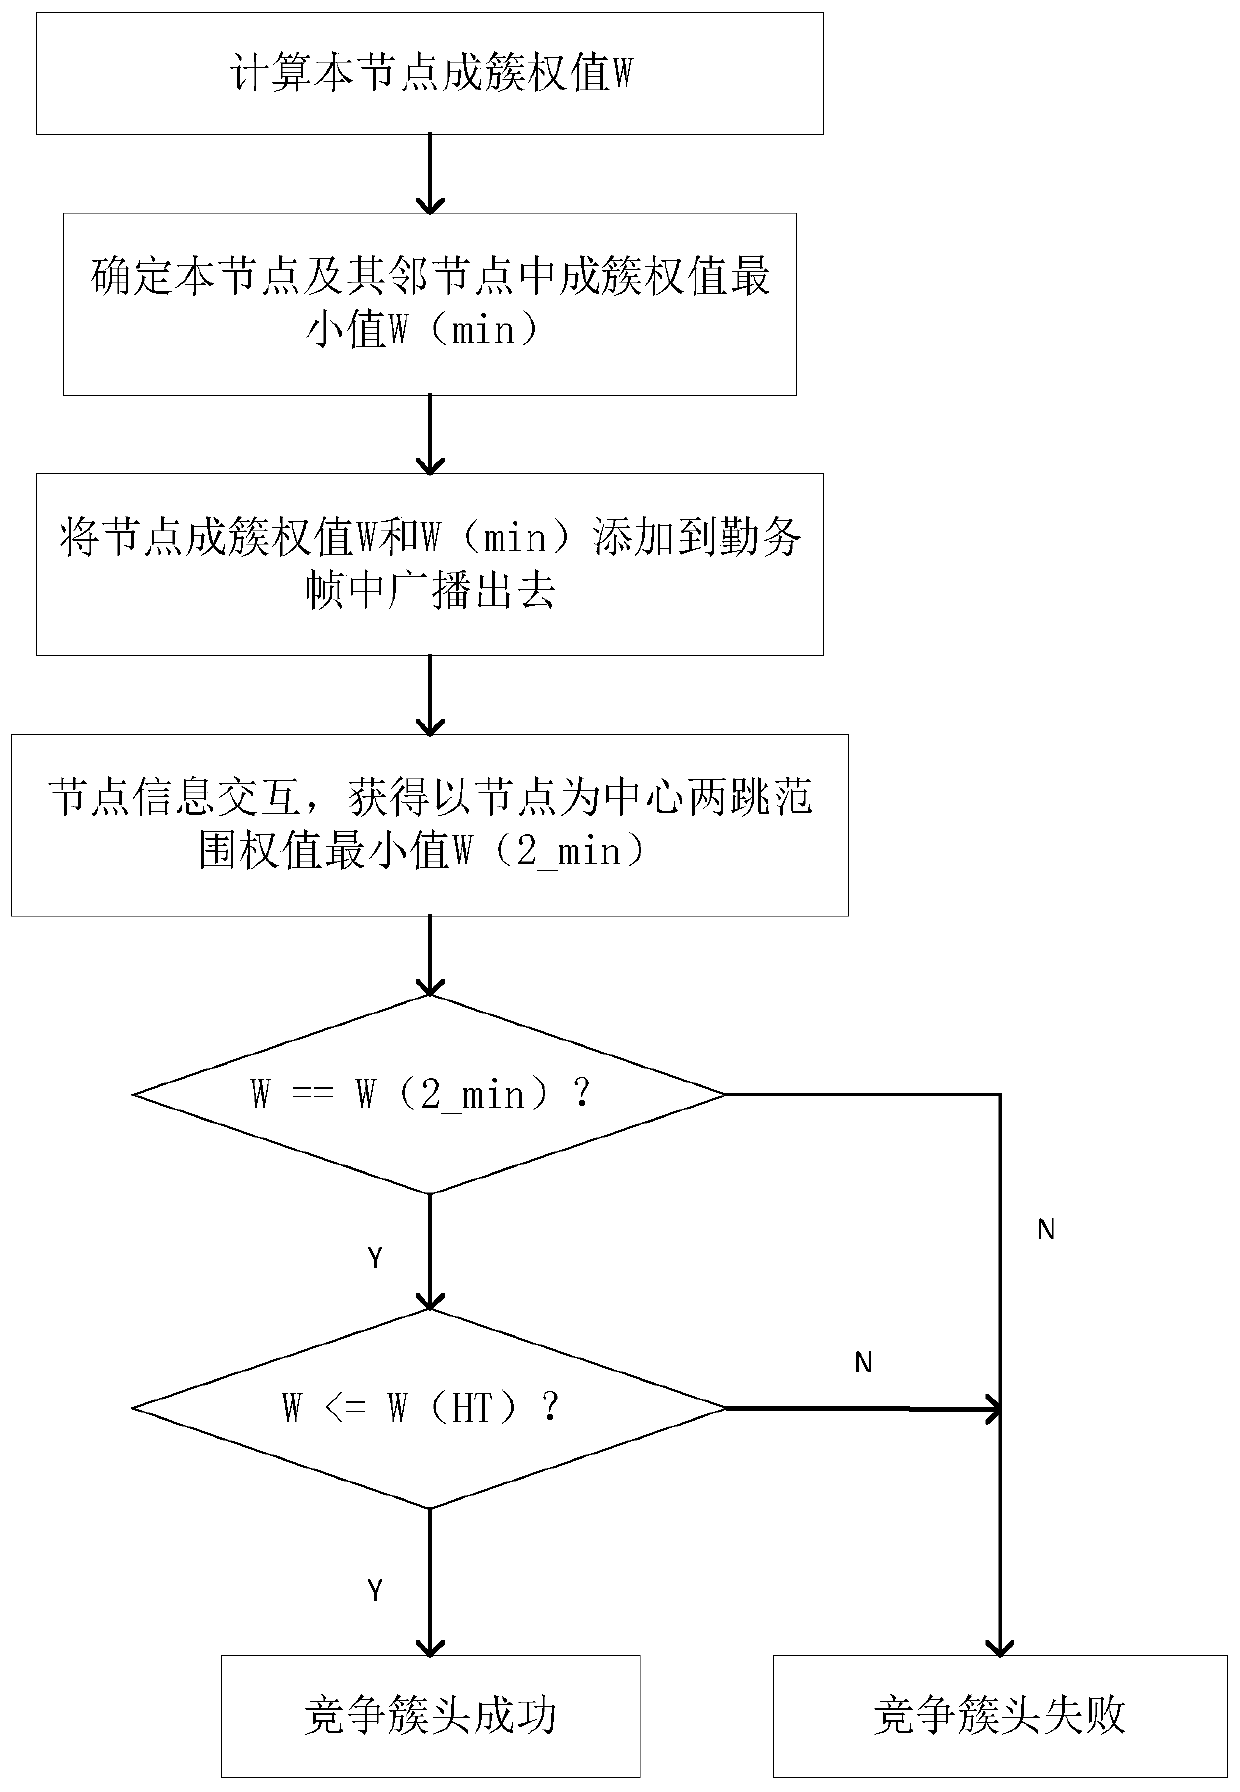 Clustering management method for improving availability of distributed multi-hop network